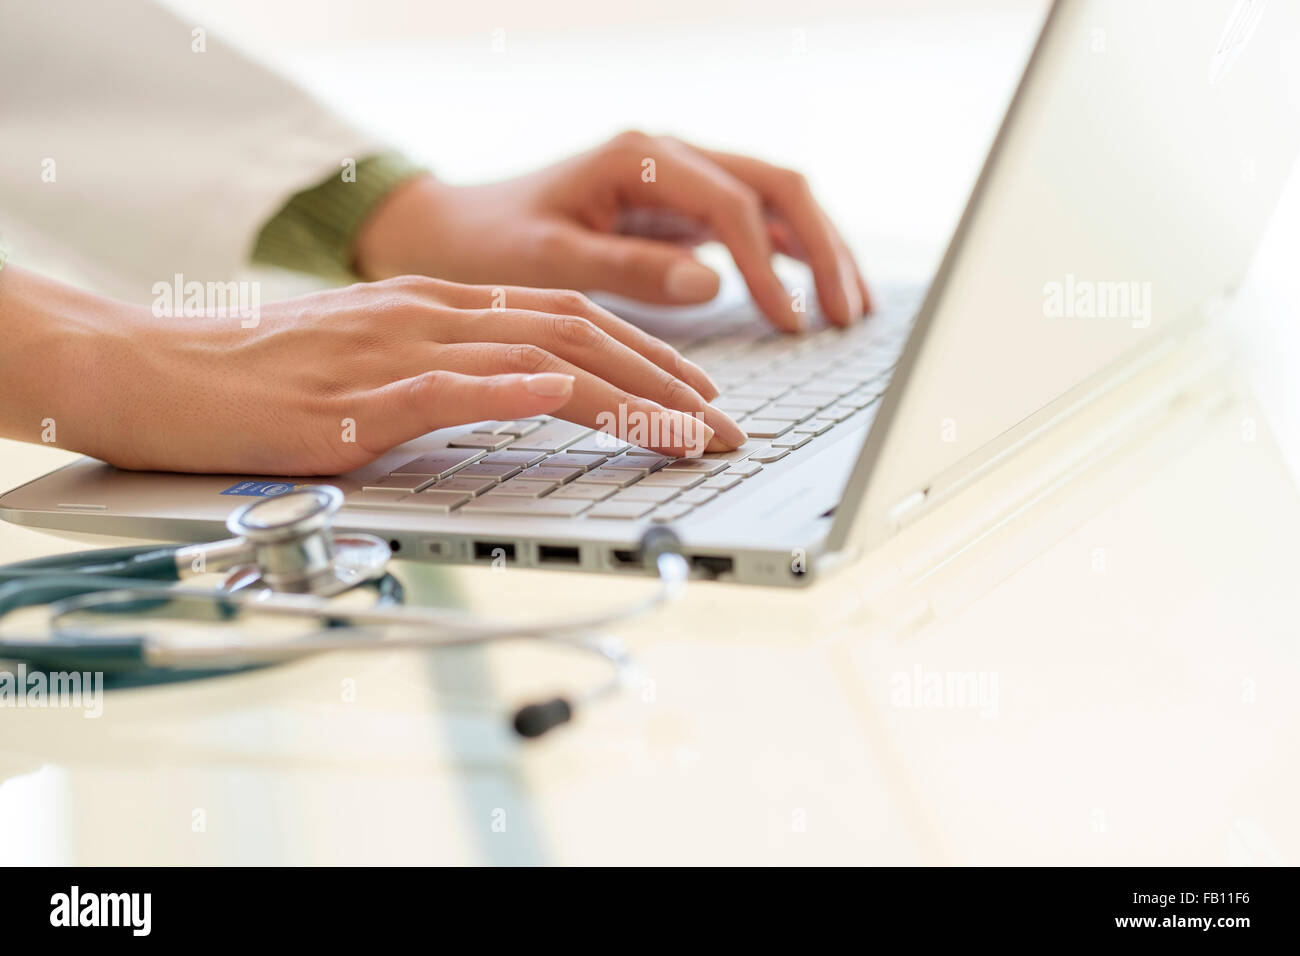 Hands typing on laptop keyboard Banque D'Images